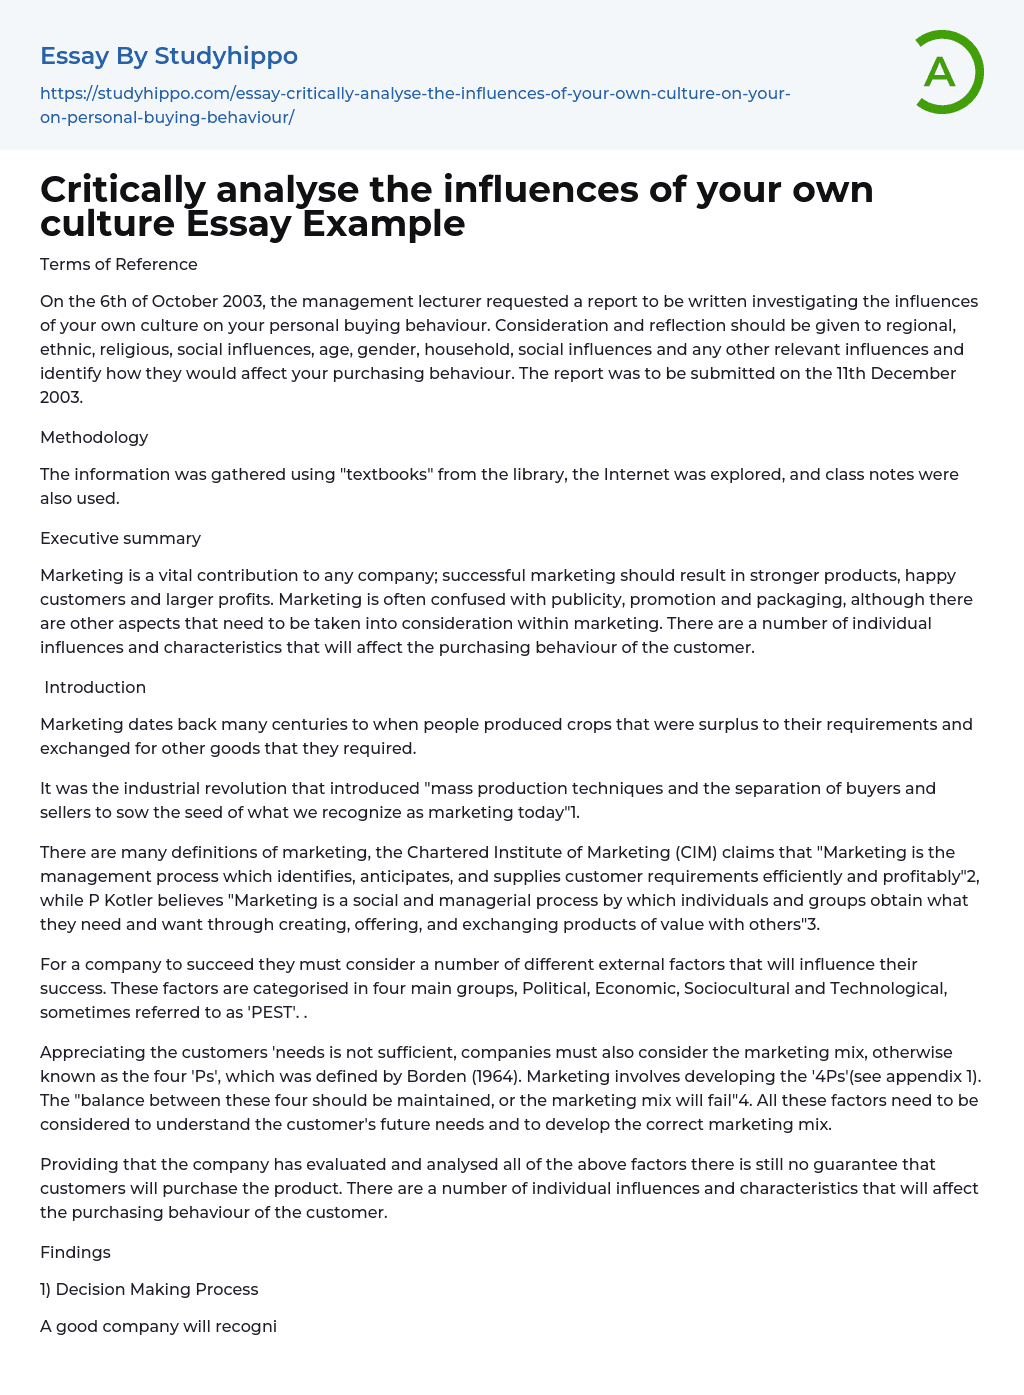 Critically analyse the influences of your own culture Essay Example